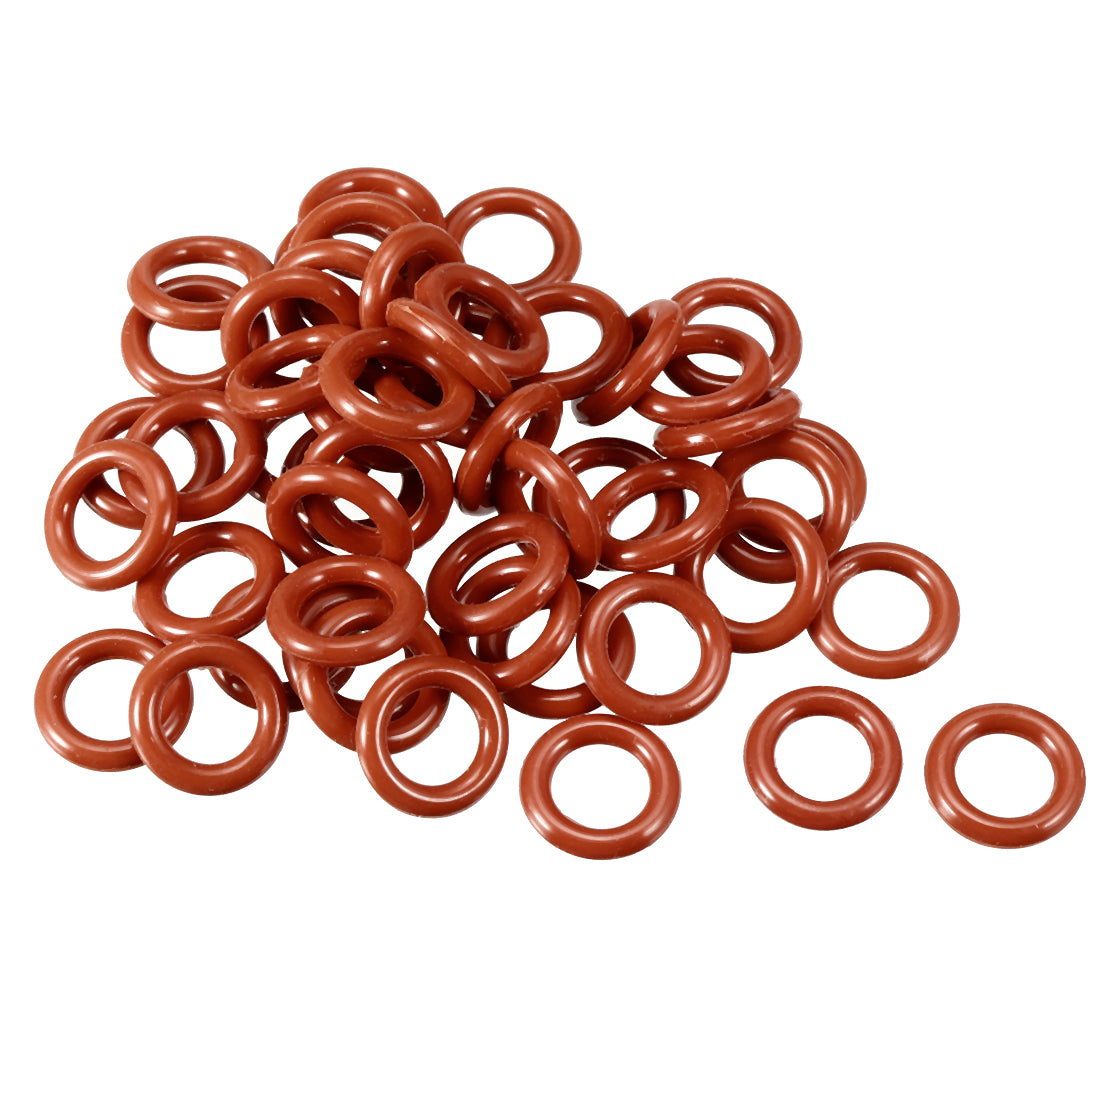 uxcell Uxcell Silicone O-Ring 12mmx7.2mmx2.4mm VMQ Seal Rings Sealing Gasket Red 50PCS